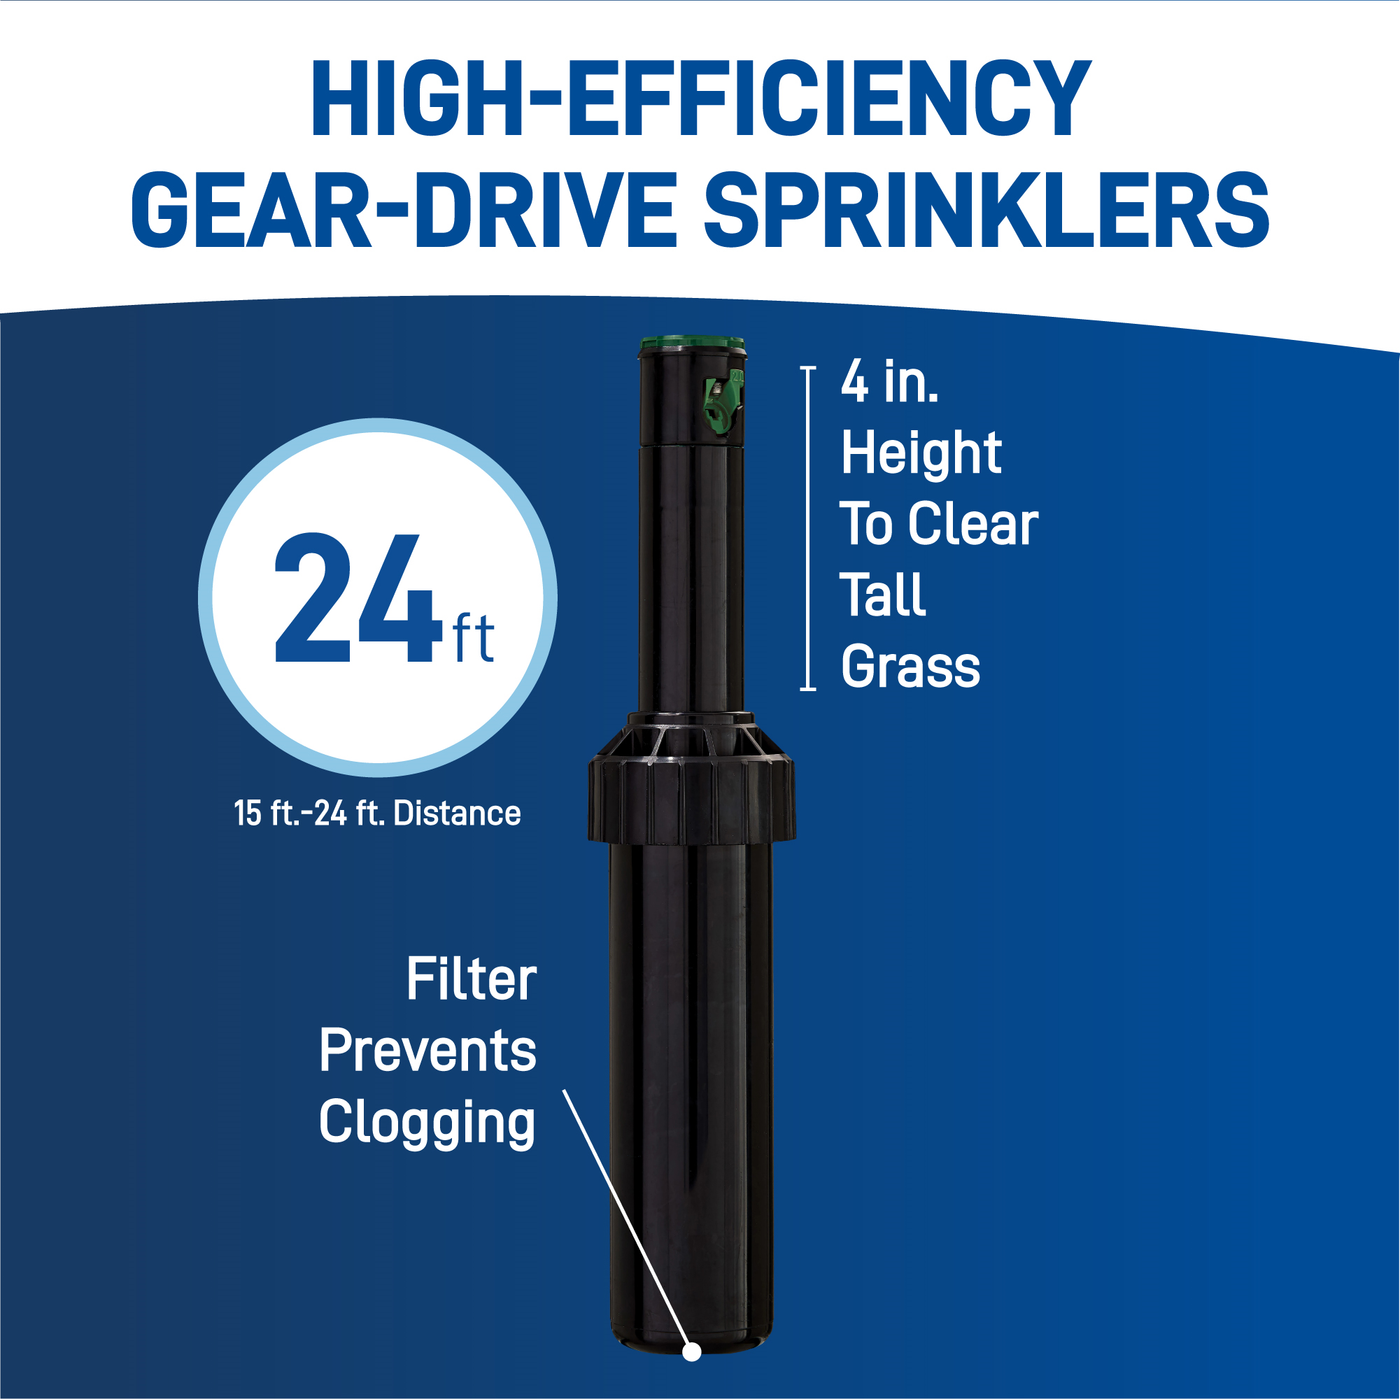 Four inch high efficiency gear drive sprinkler with filter that prevents clogging. 